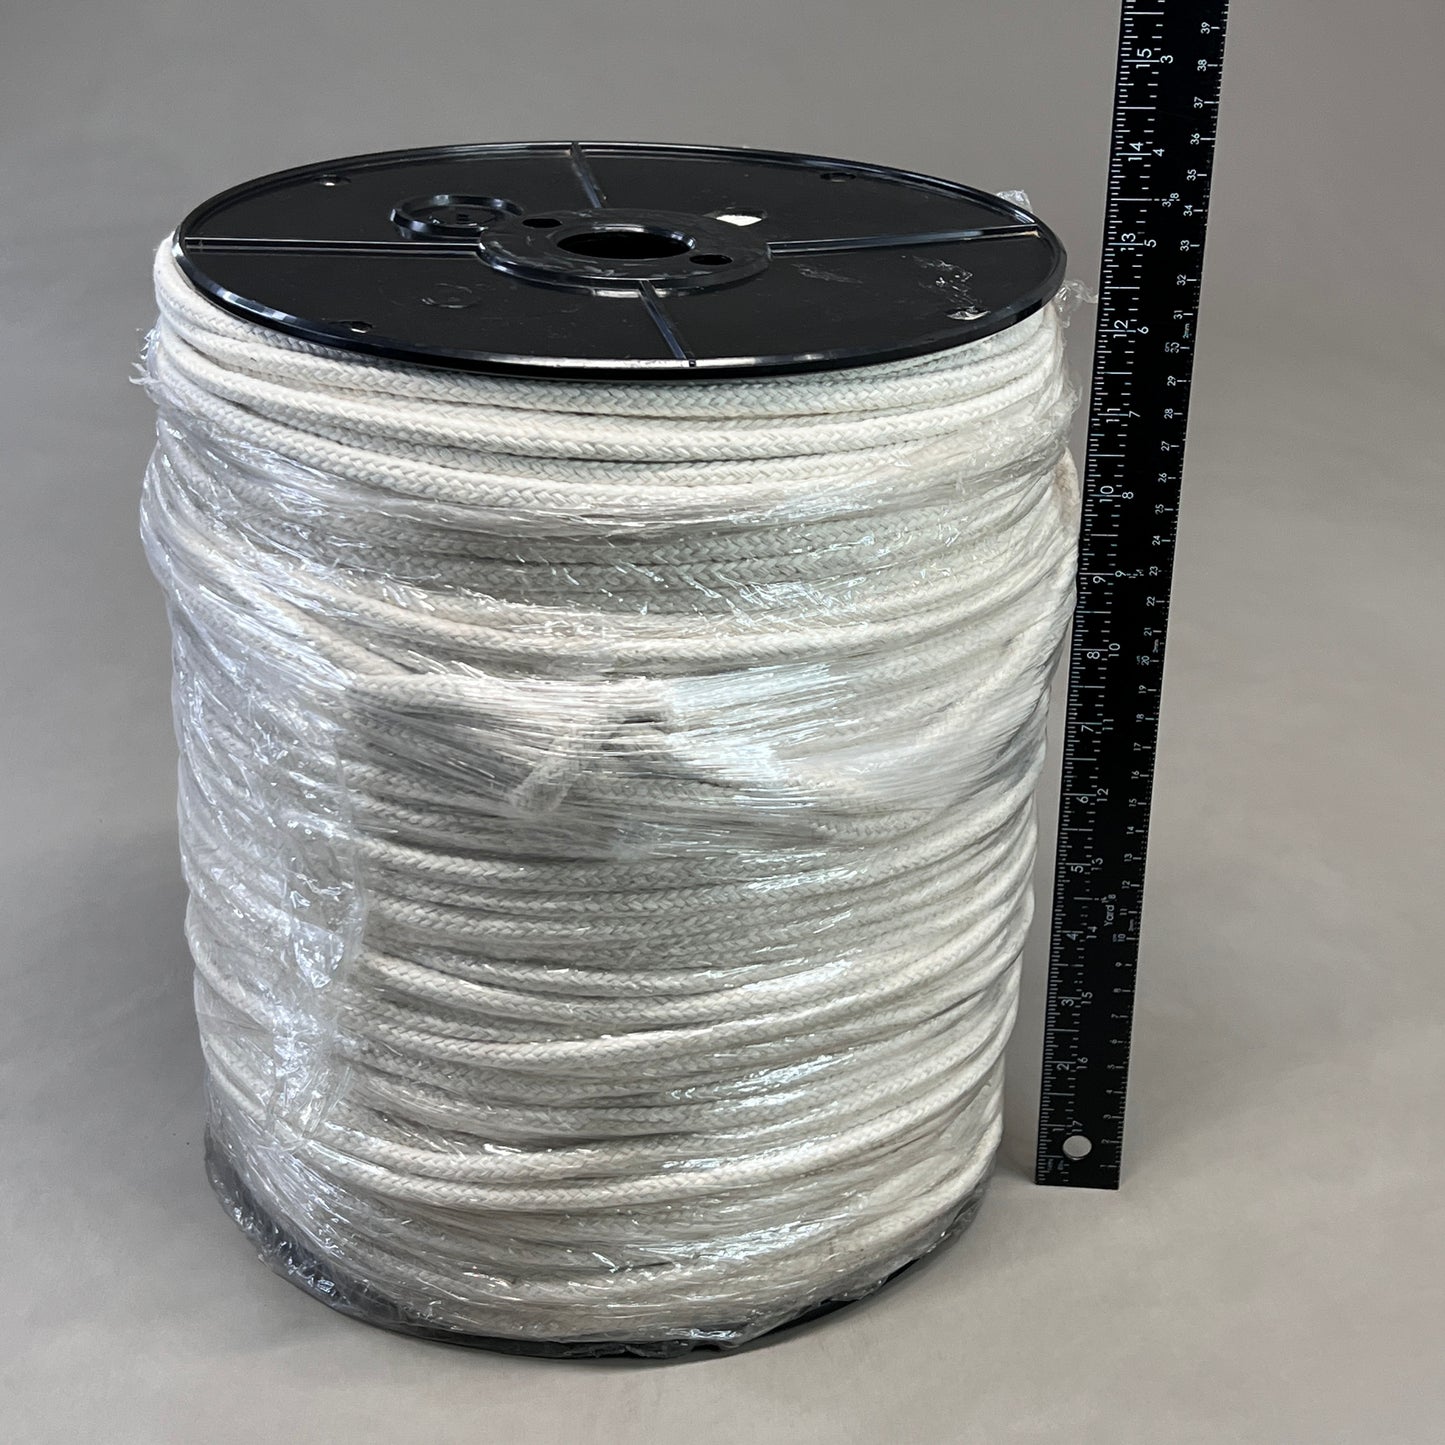 UNBRANDED Cotton Rope w/ Nylon Cord Clothesline Rope White +250 ft (New)